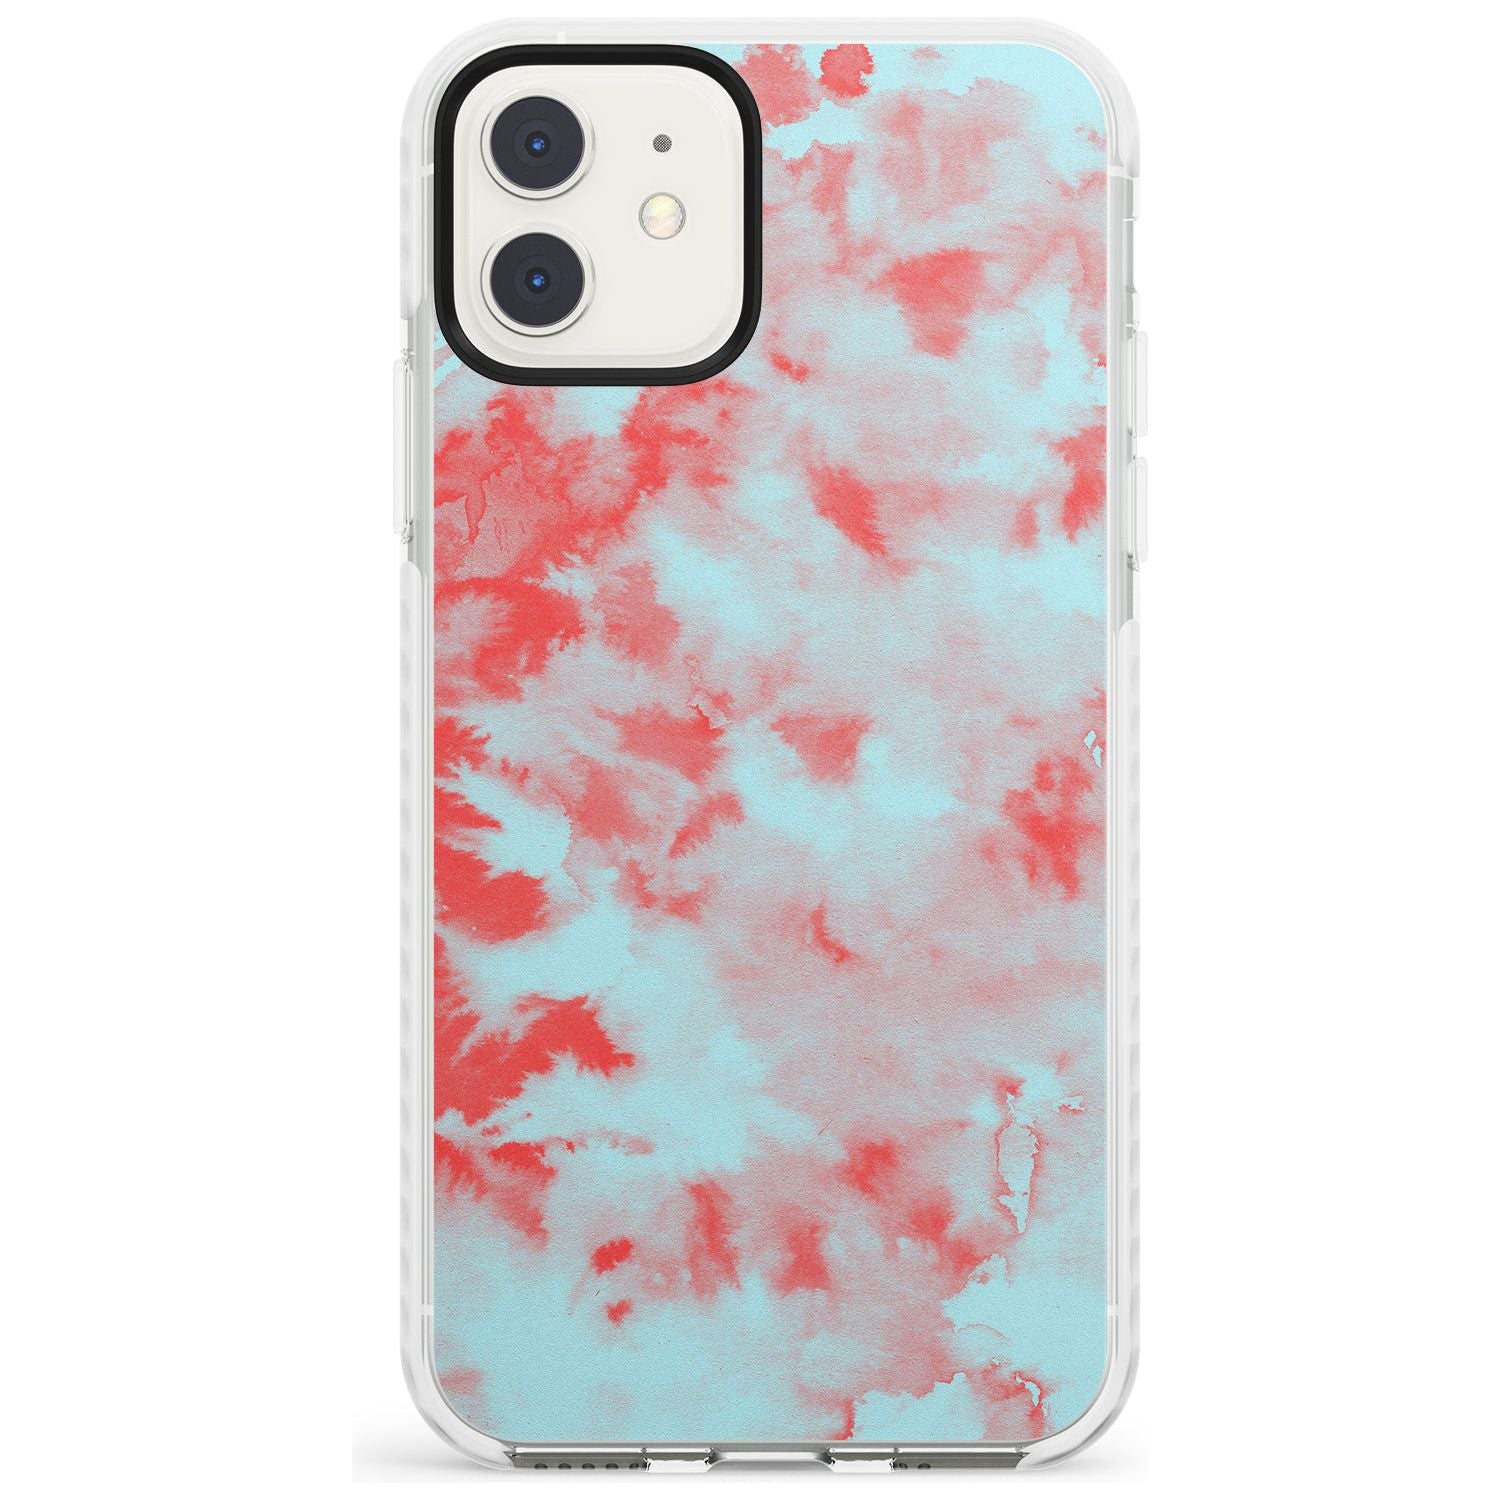 Red & Blue Acid Wash Tie-Dye Pattern Impact Phone Case for iPhone 11